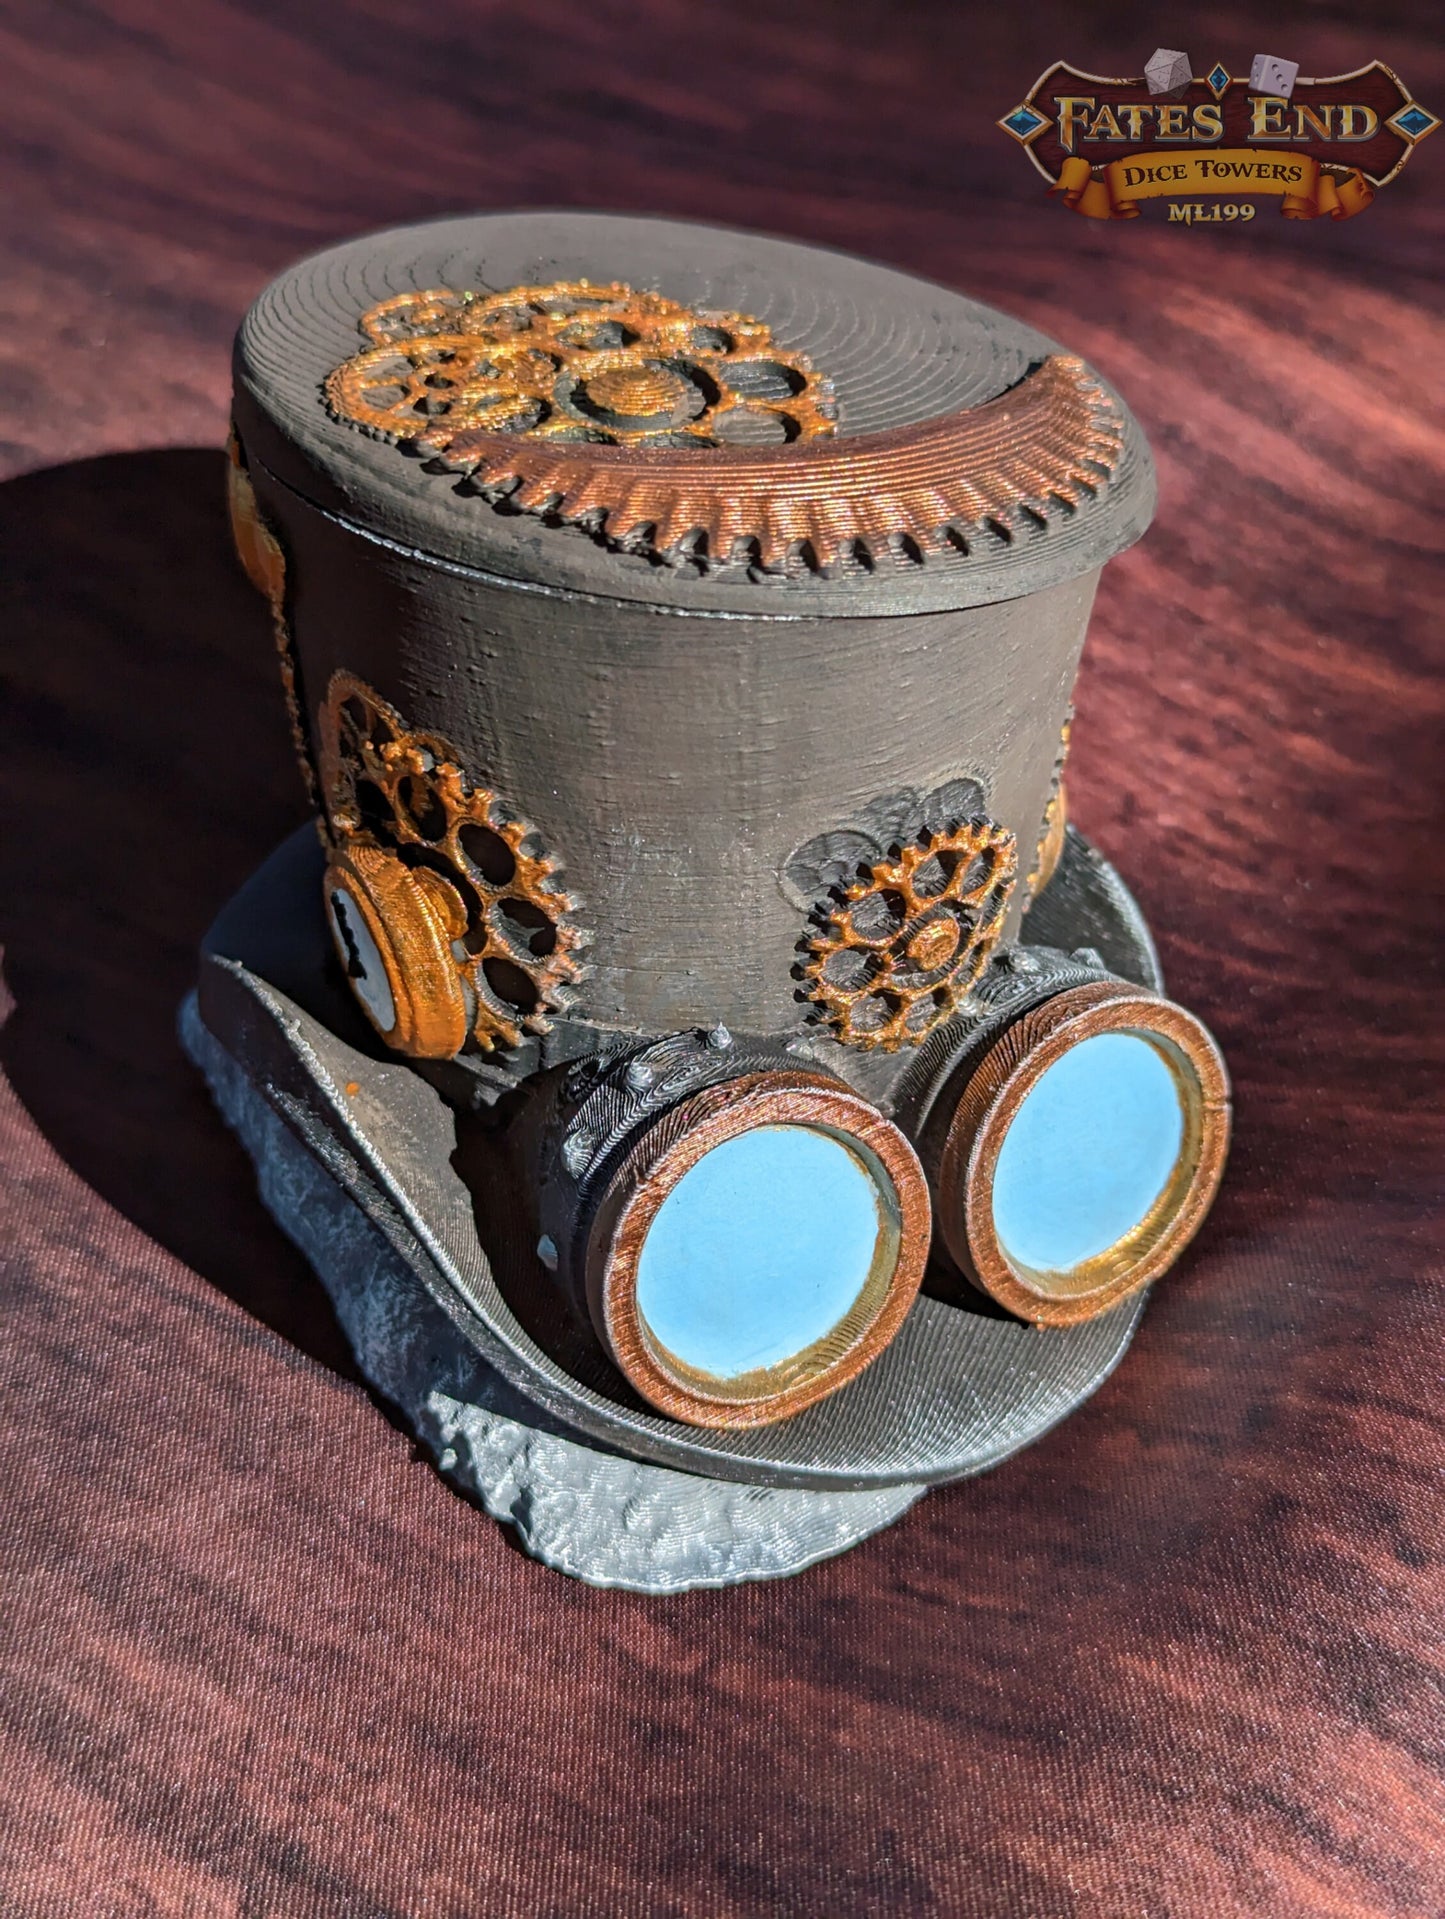 Steampunk Clock Hat 3D Printed Dice Vault - Fate's End Collection | RPG Dice Jail | D20 Dice Box | - Industrial Victorian Elegance!